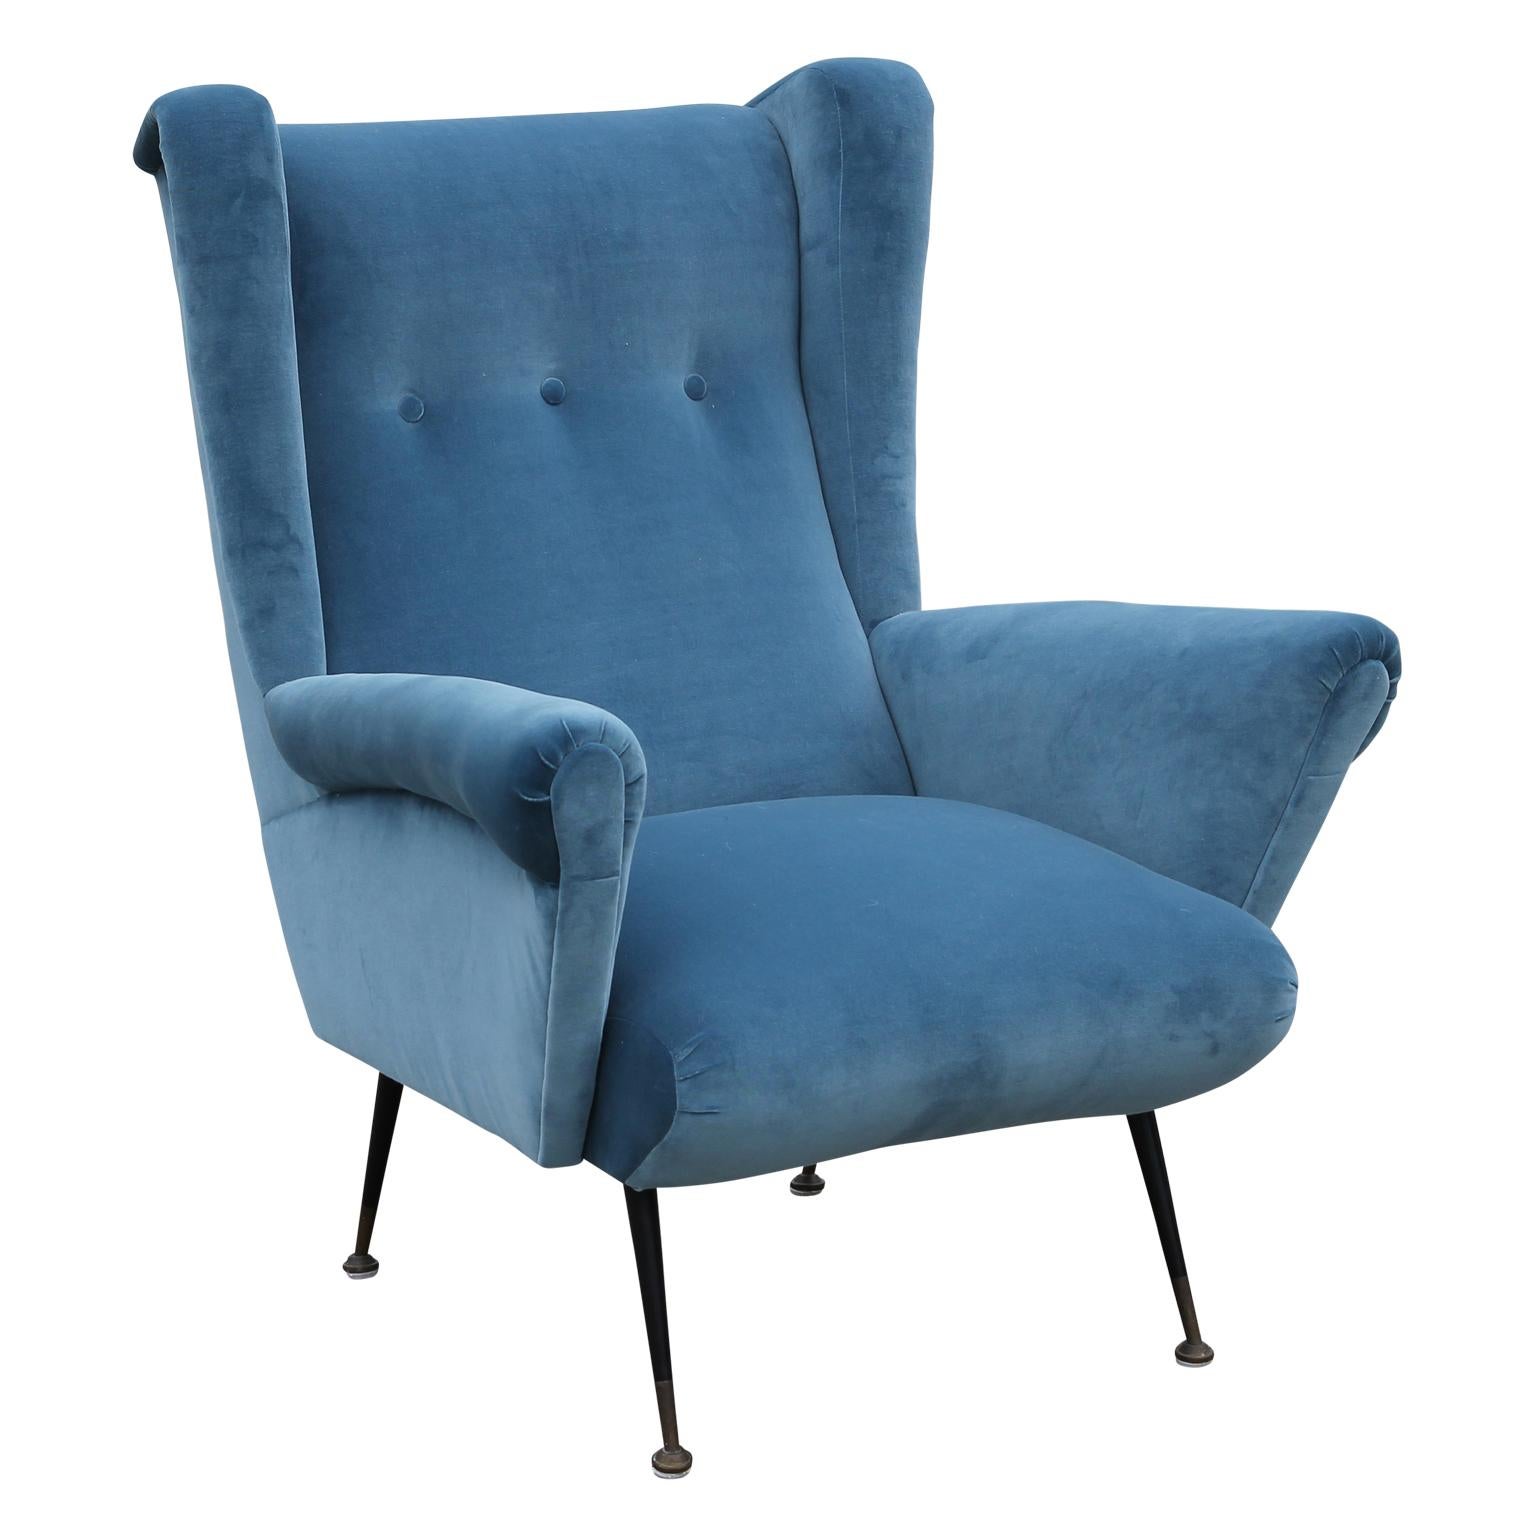 Wonderful pair of wingback lounge chairs made in Italy, circa 1950. Chairs are freshly upholstered in a soft blue velvet. Delicate black enameled legs are finished in patinated brass levellers. Stunning from all angles.